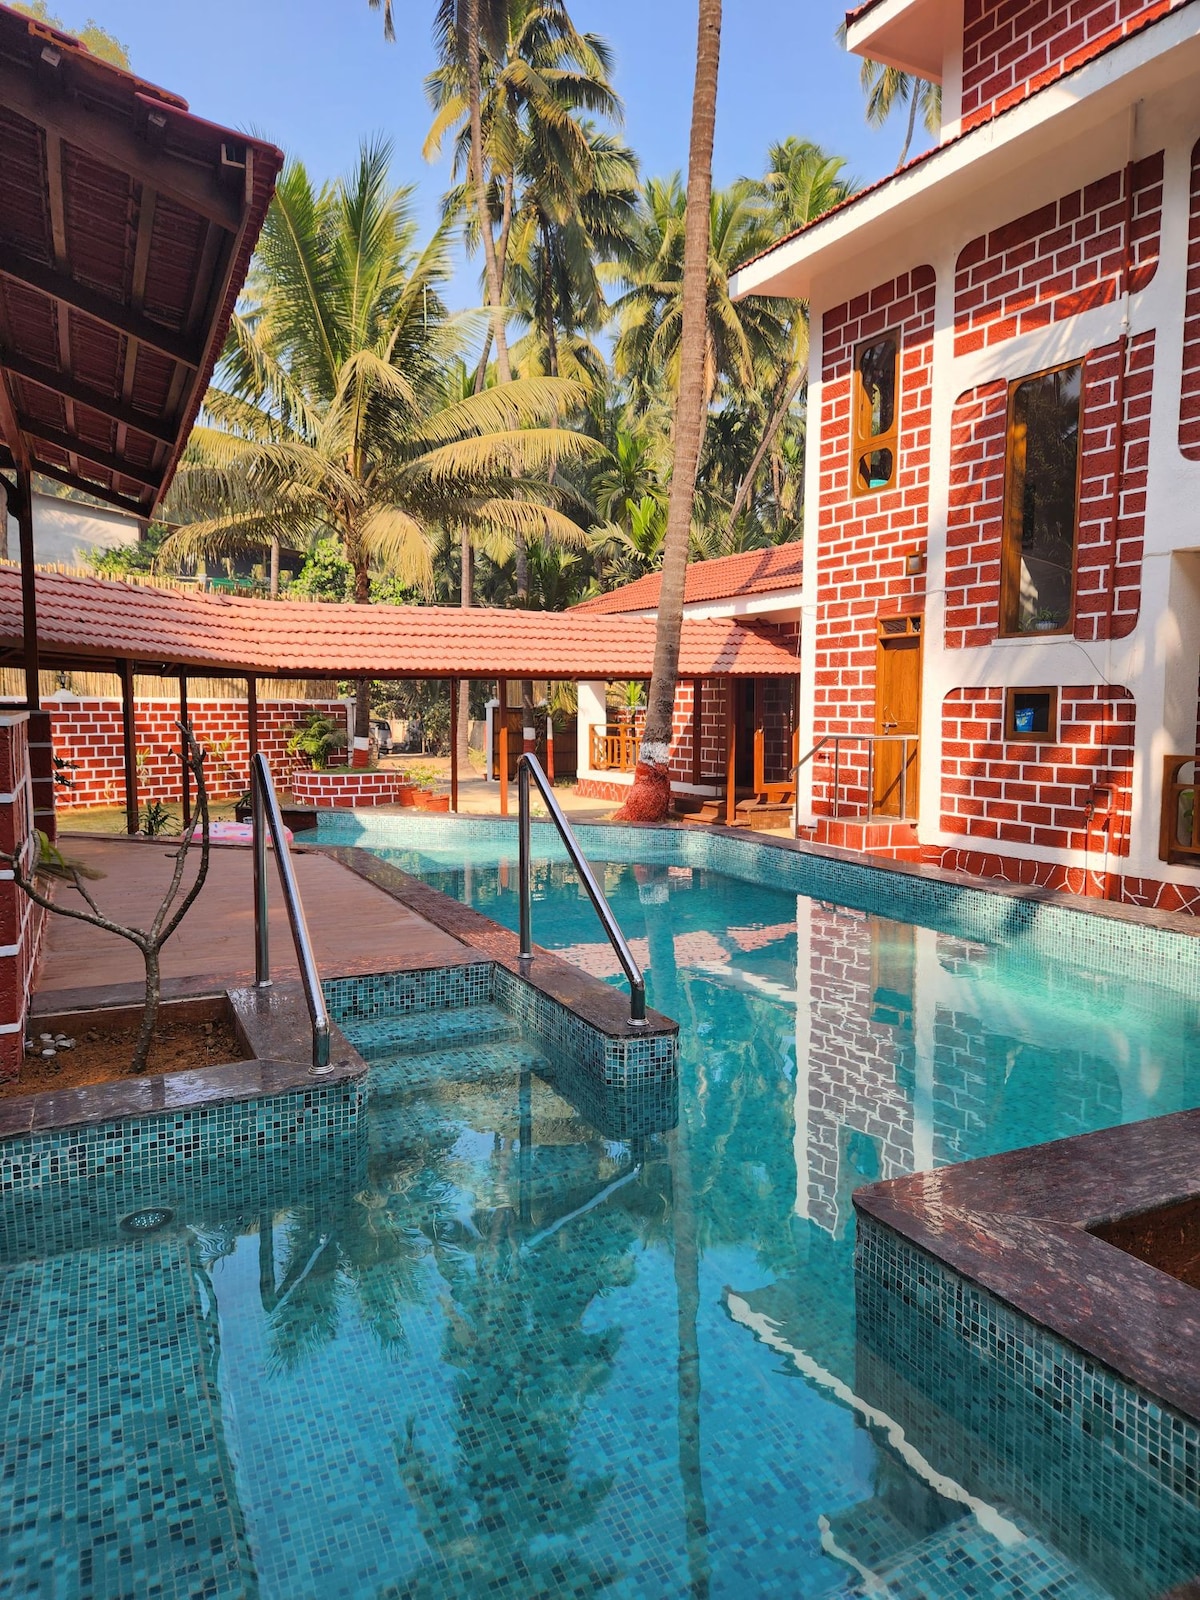 The Chira House
A Heritage Home stay at Alibag